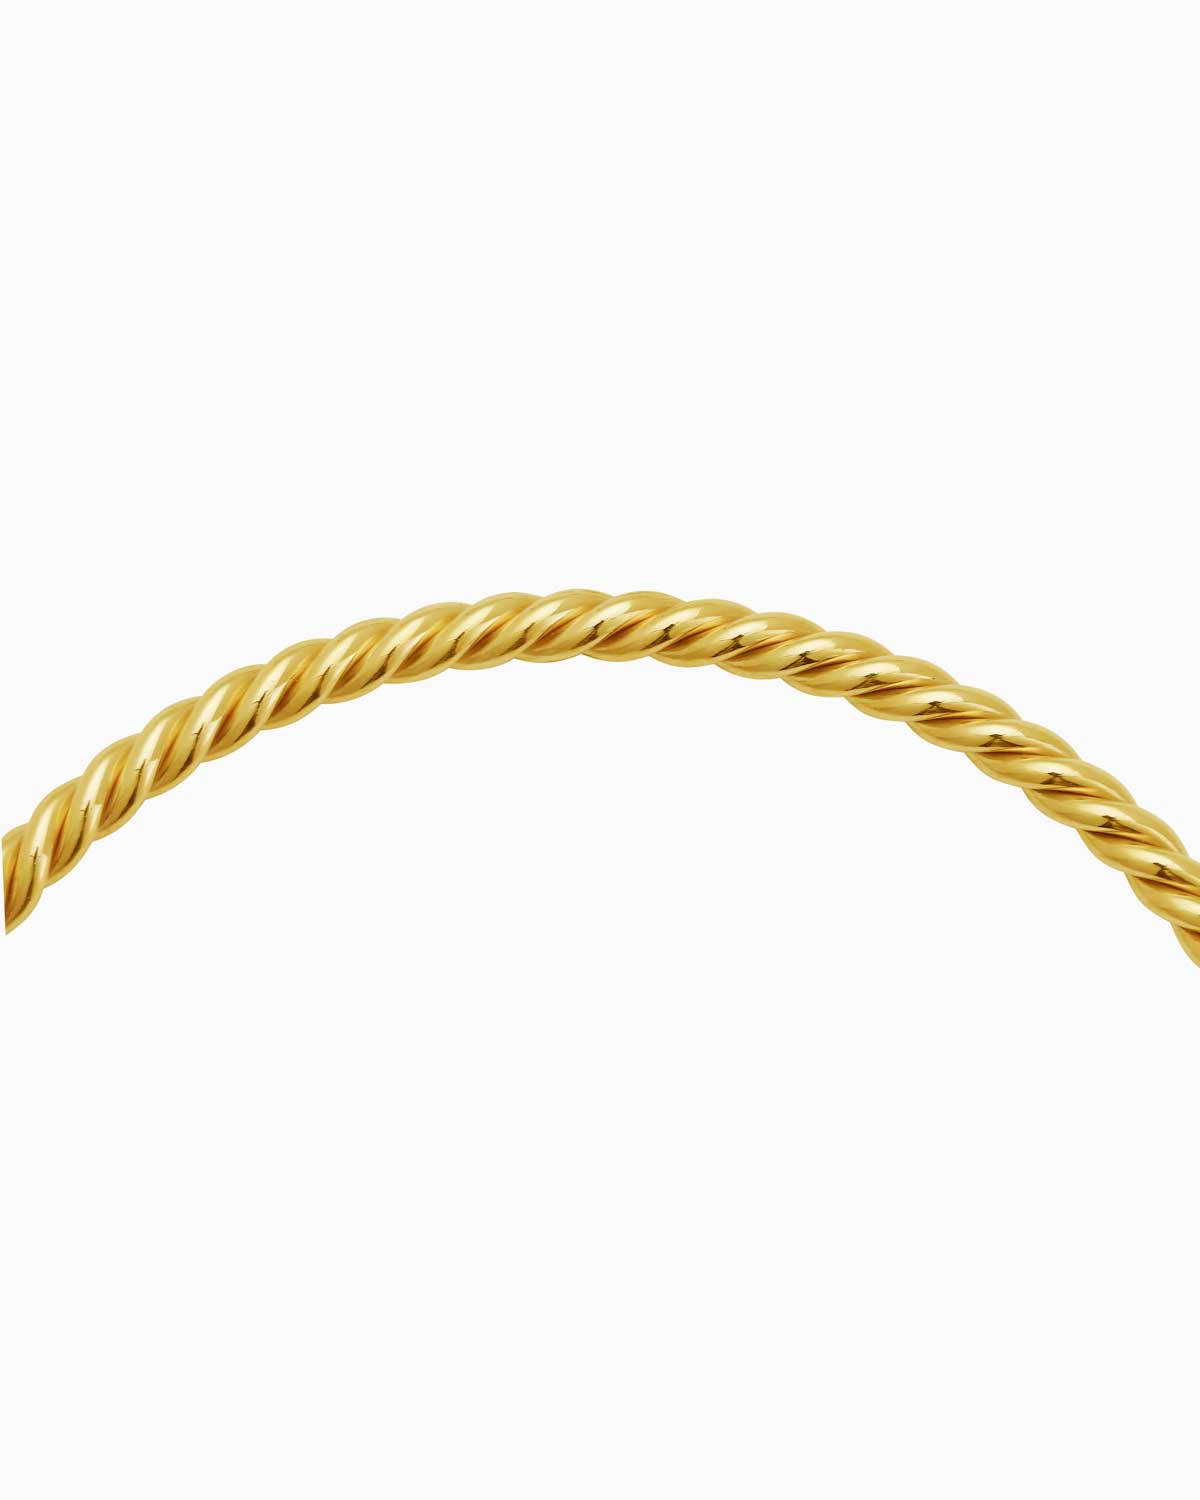 close up of 9 karat yellow gold solid twisted bangle